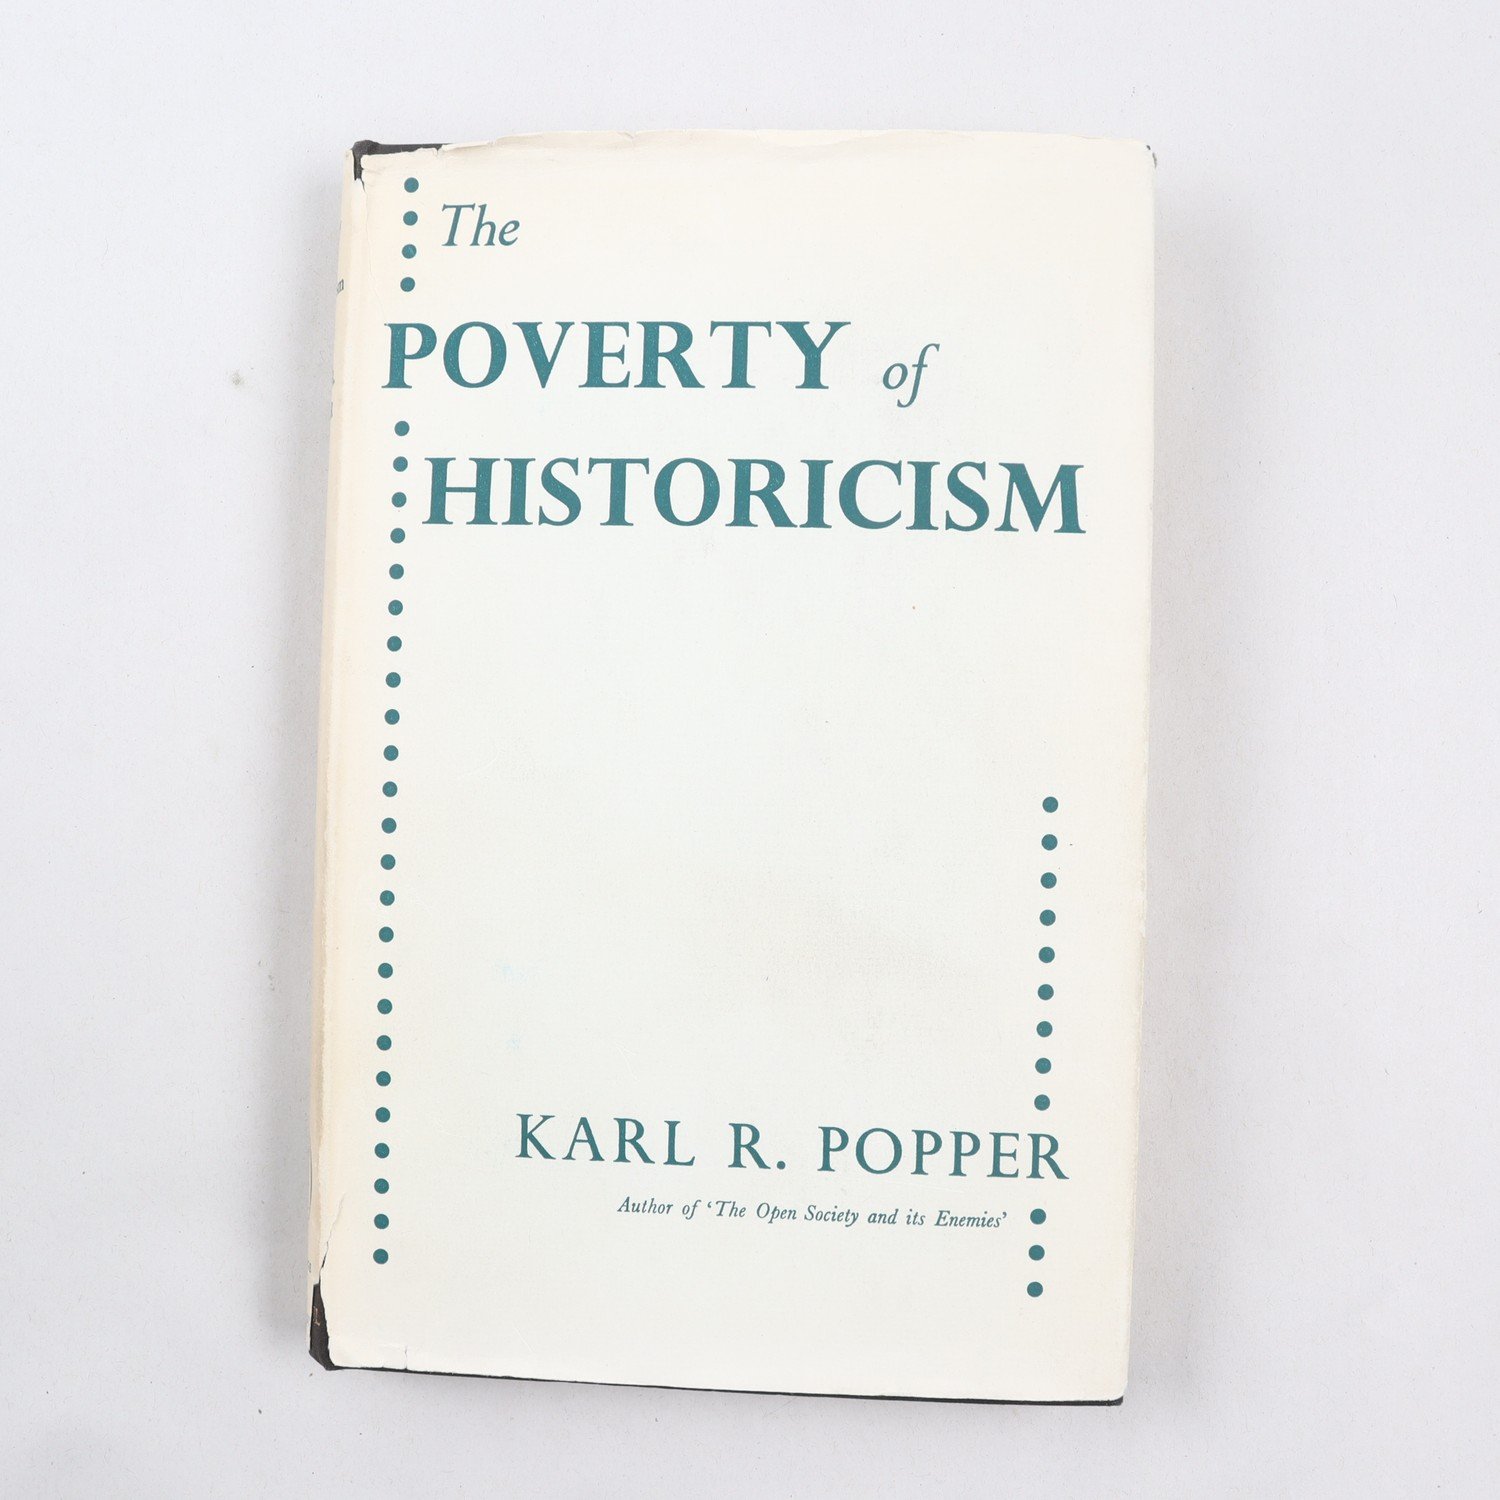 Karl R. Popper, The Poverty of Historicism (1957)